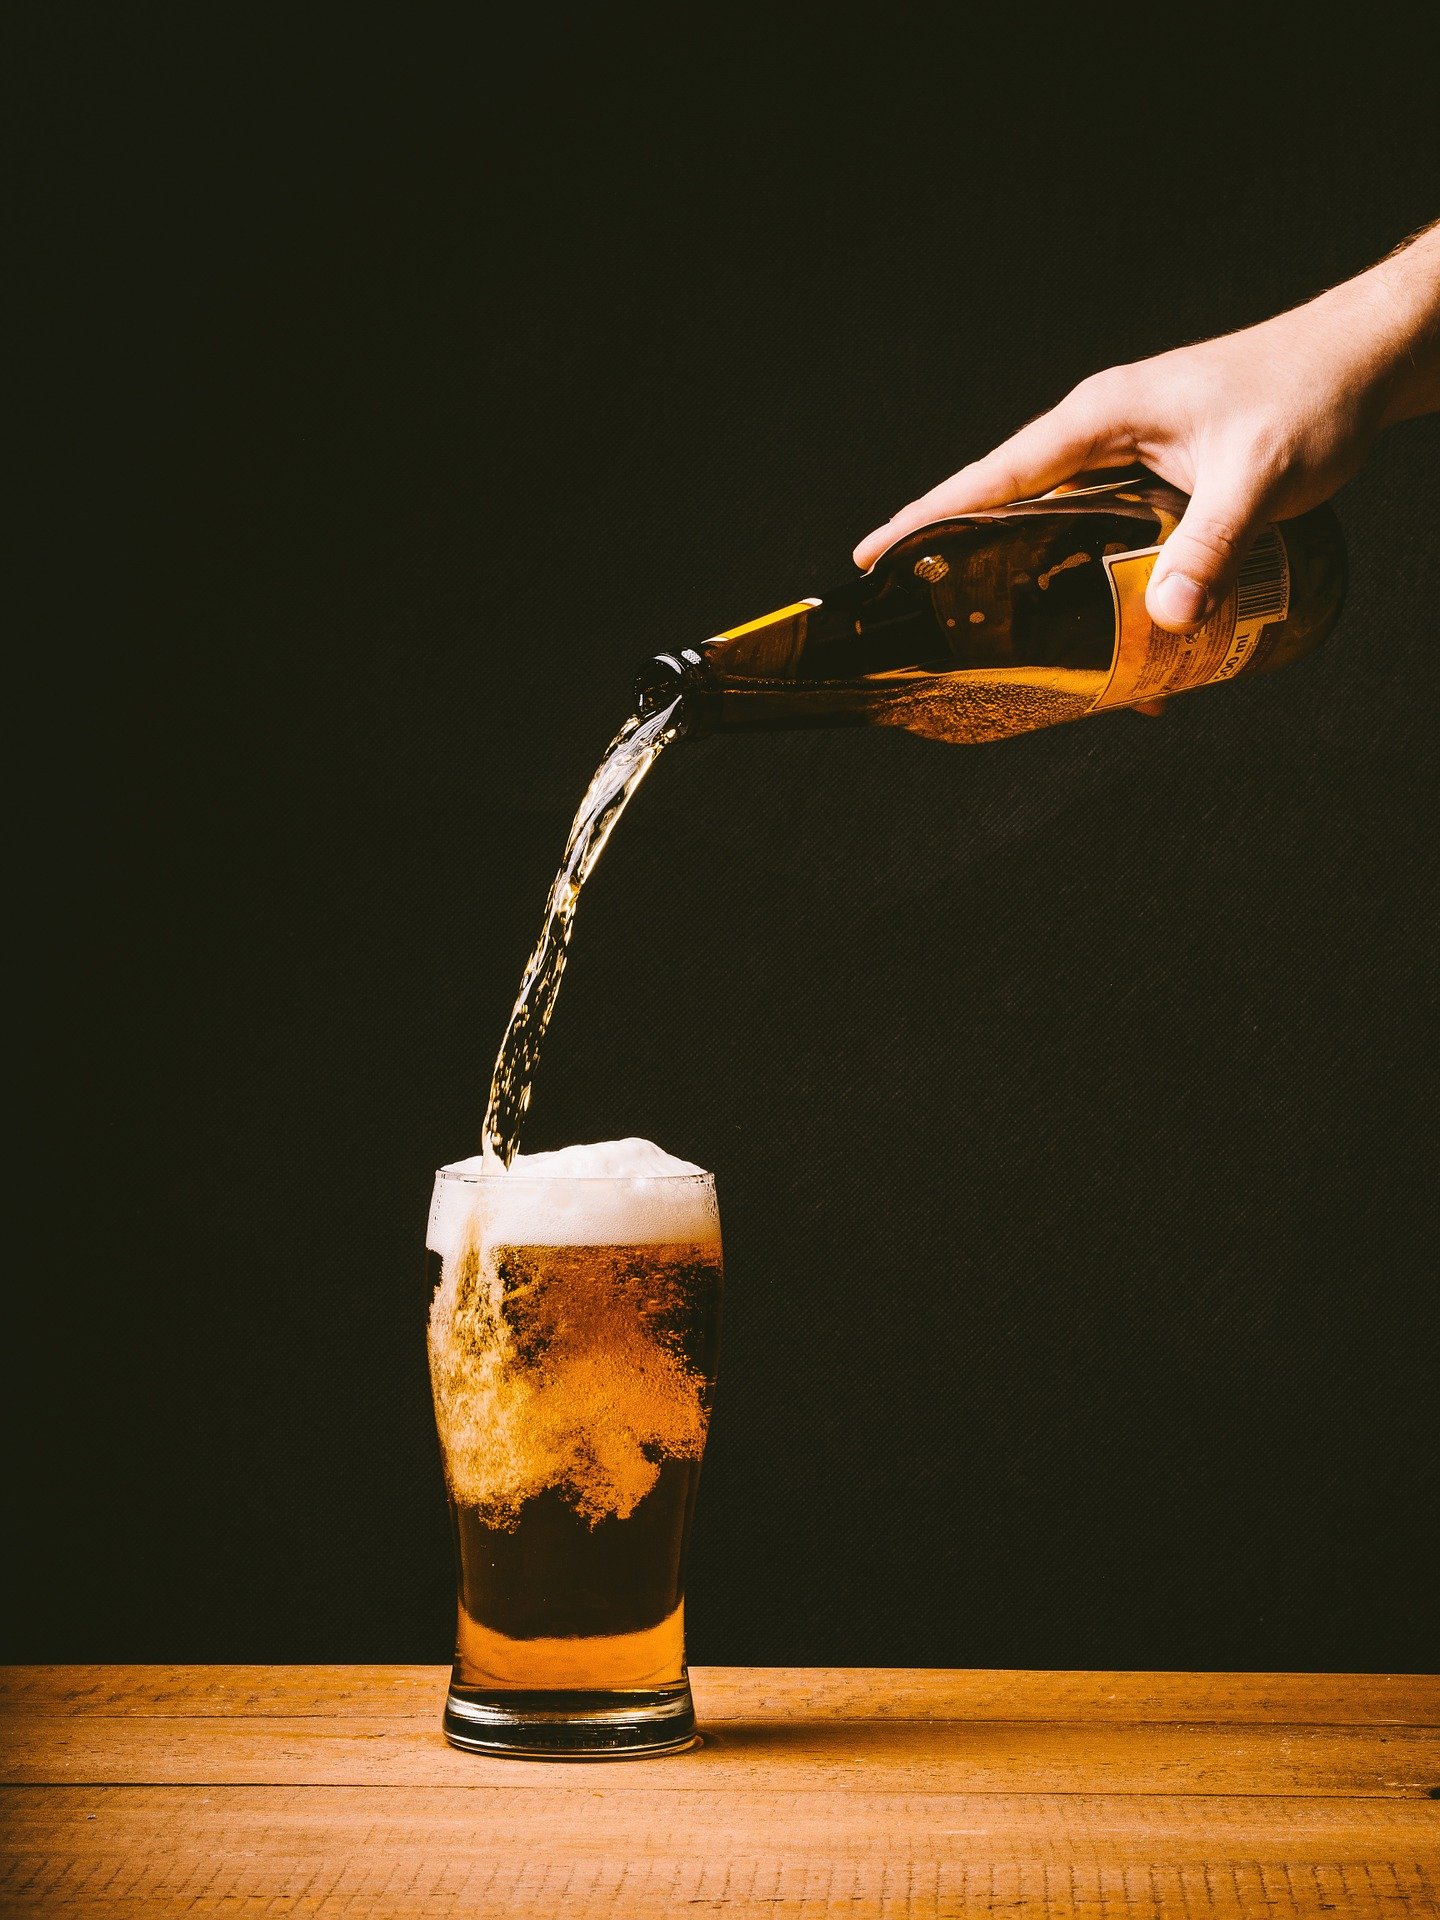 Pictured - A man pouring a glass of beer | Source: Pixabay